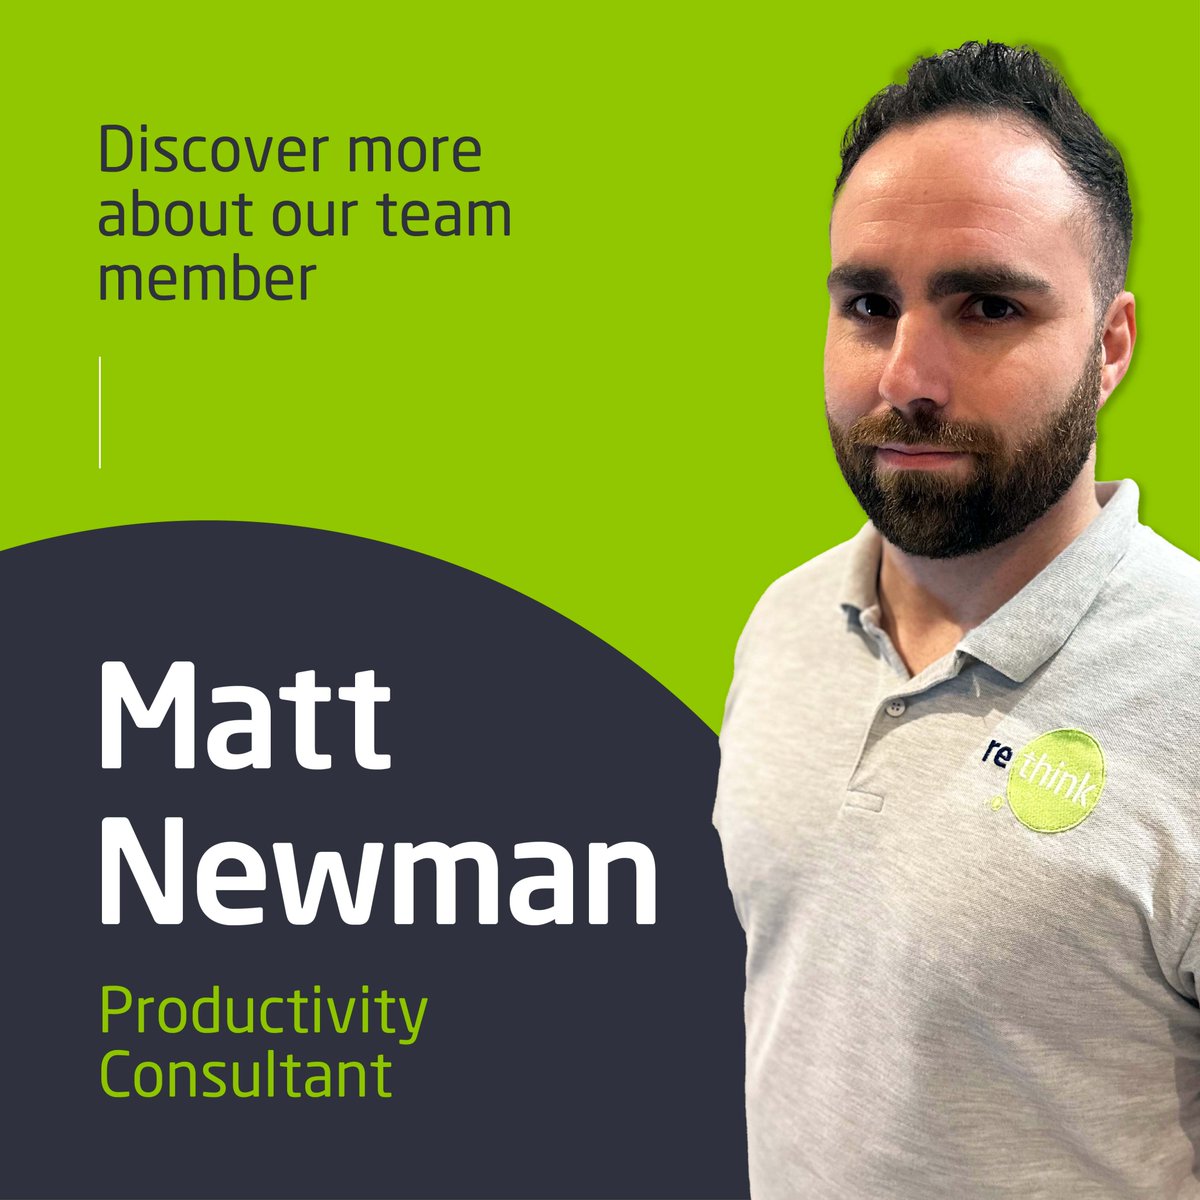 Read all about Matt Newman, our Productivity Consultant, who collects data for clients which is used to make more informed & successful business decisions: rethinkproductivity.co.uk/news/qa-with-m… #TheProductivityExperts